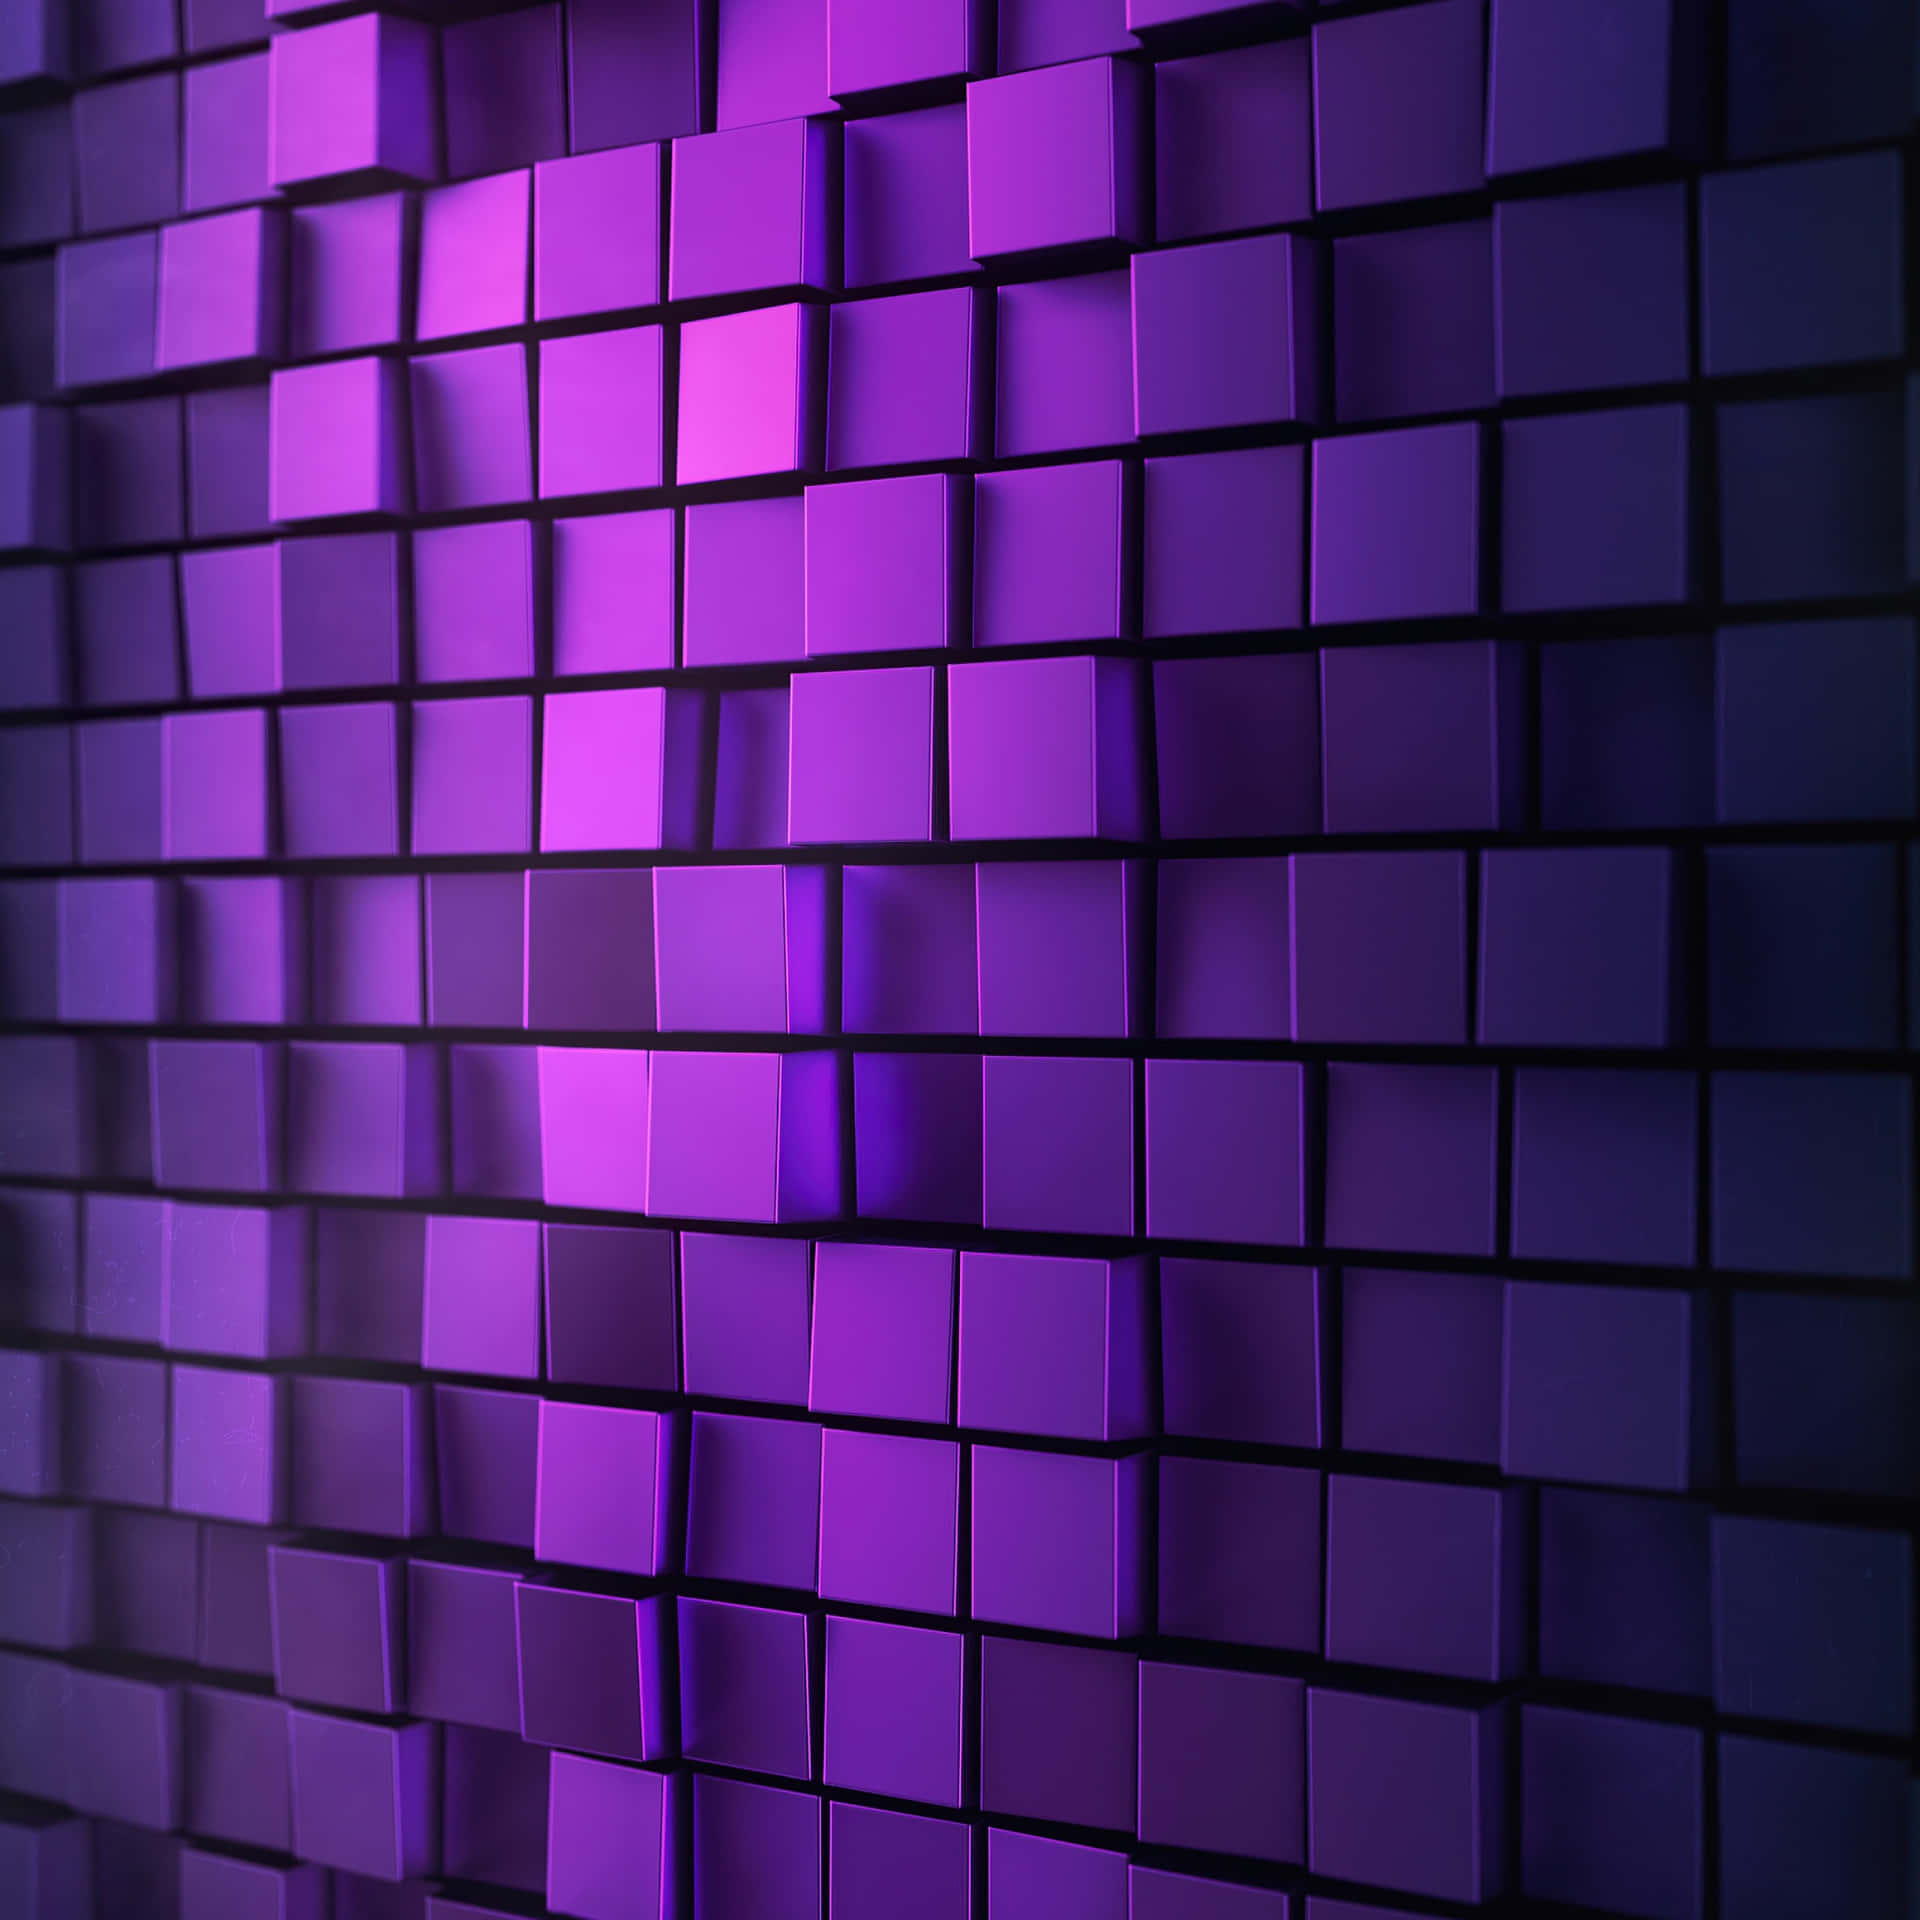 Get in the mood for creative inspiration with this aesthetic purple background